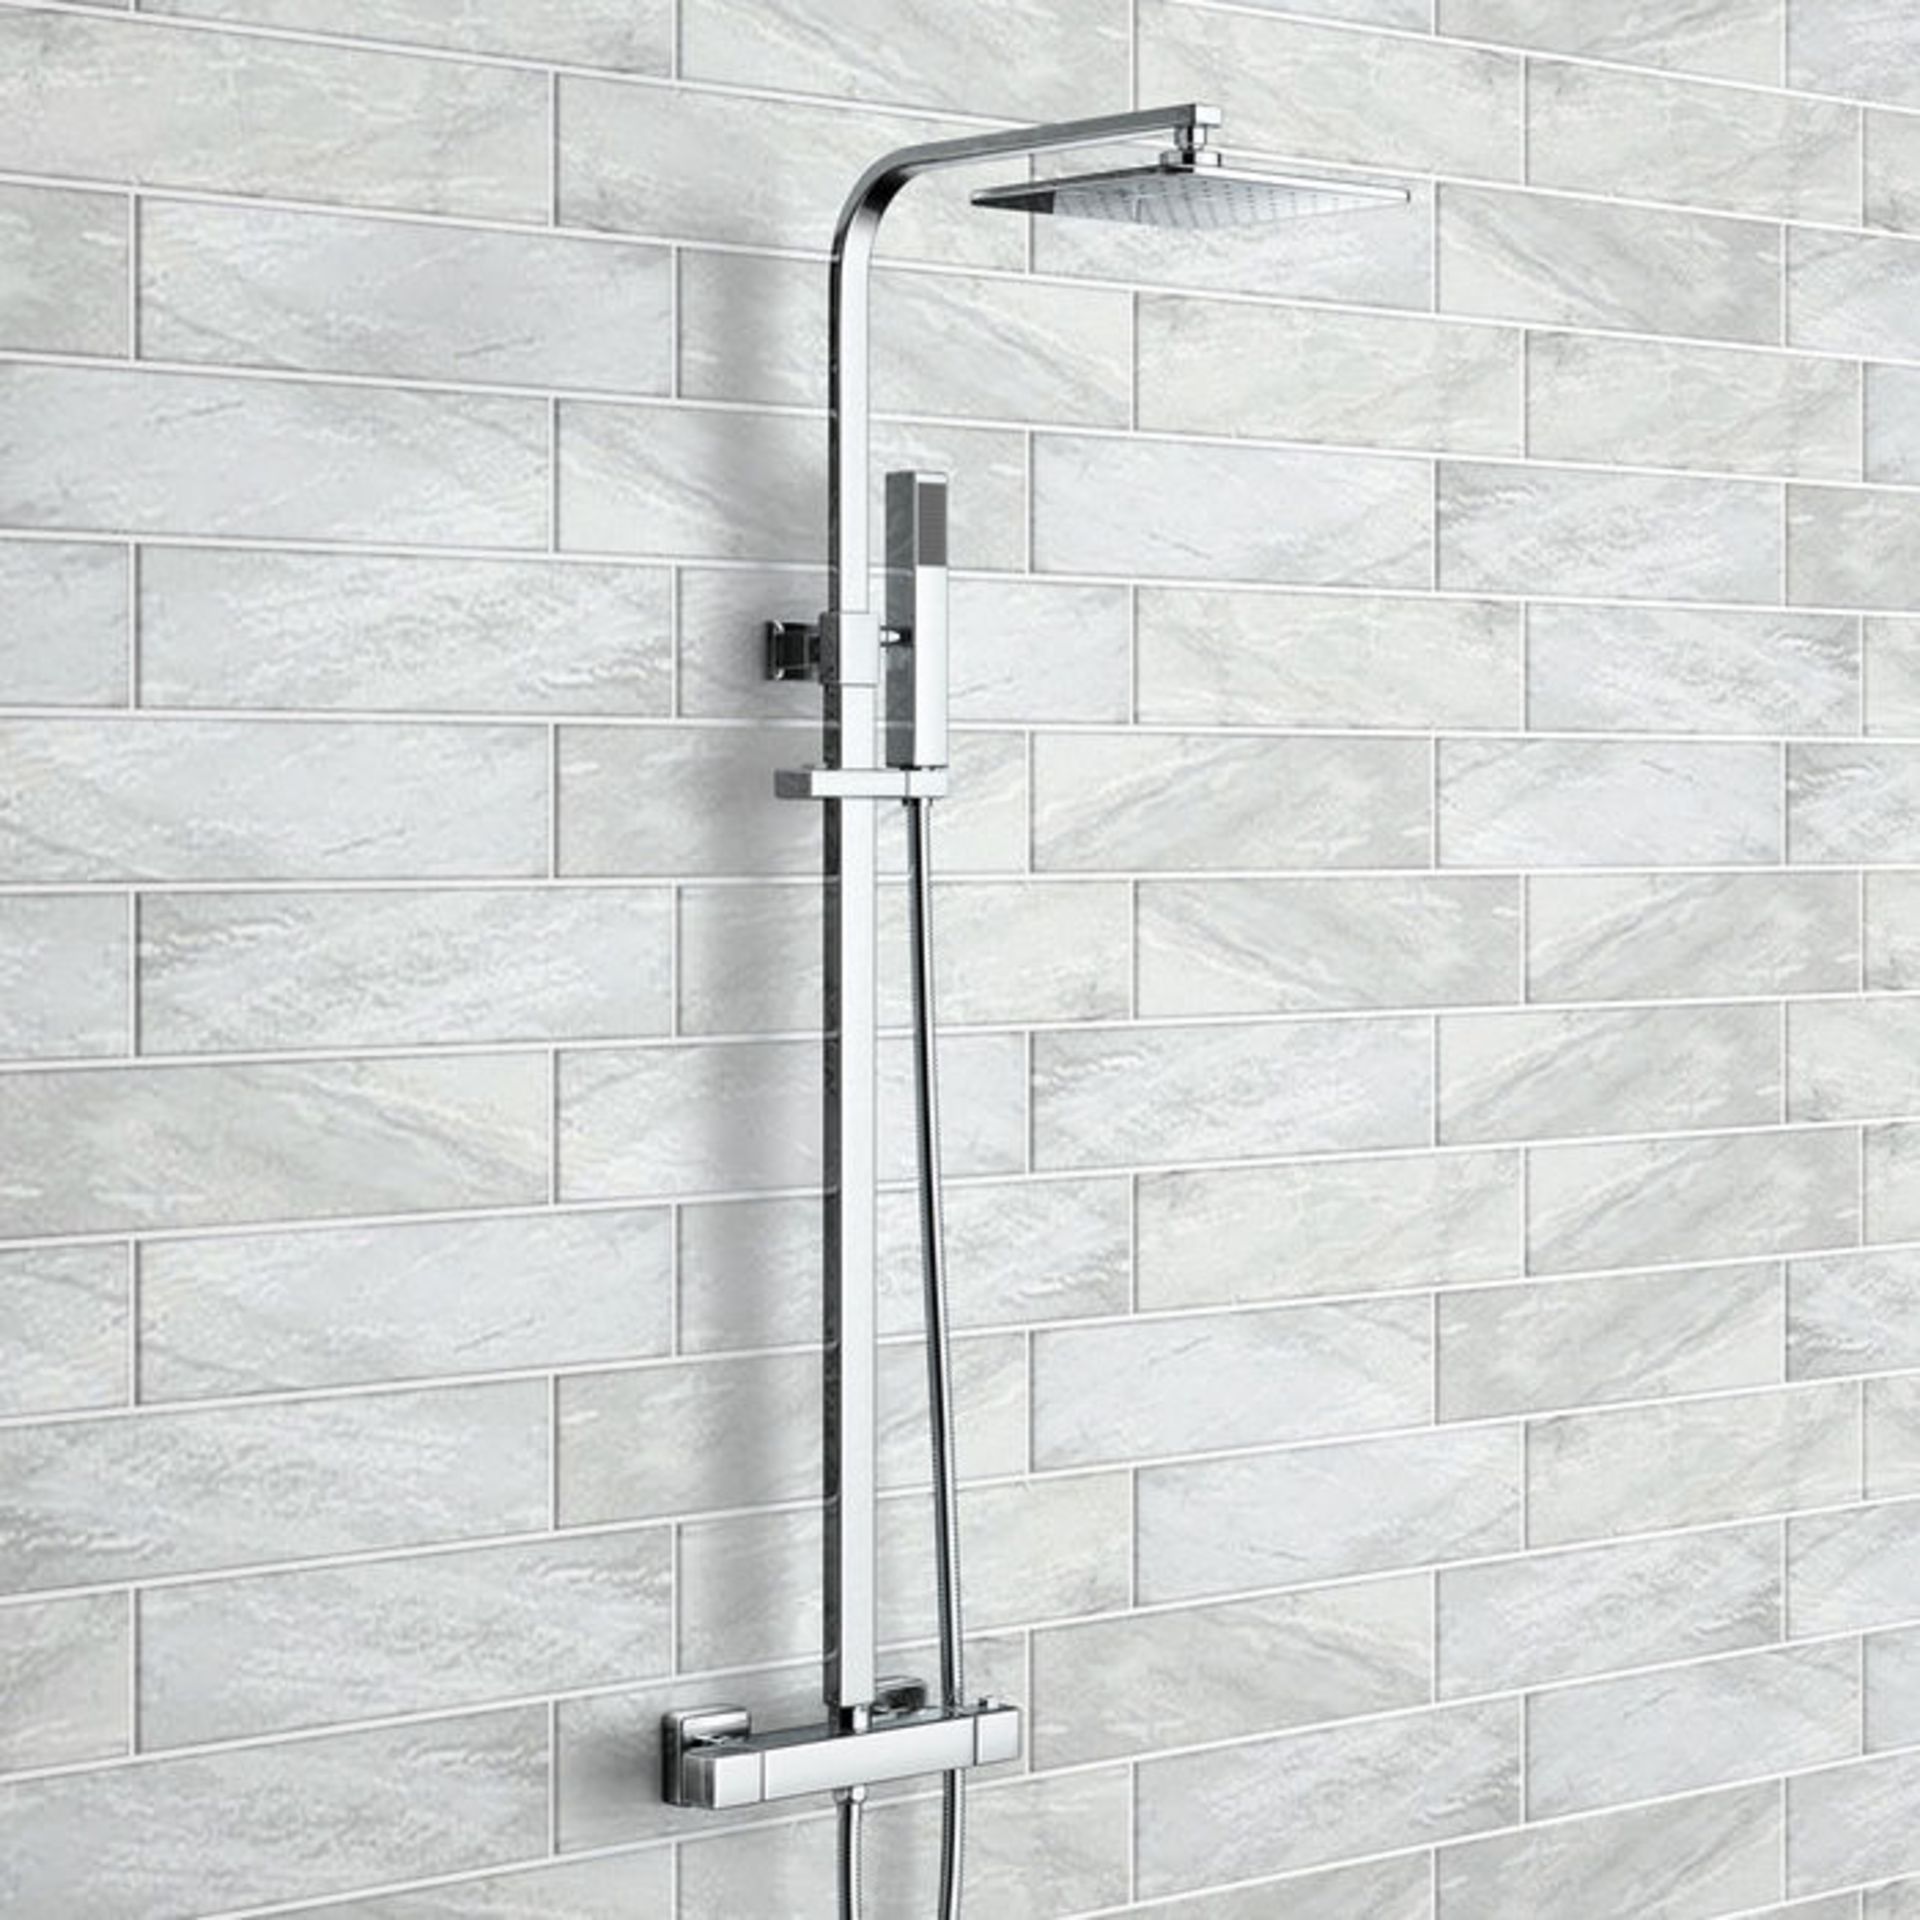 (YC222) Square Exposed Thermostatic Shower Kit & Medium Head- Harper. Angled slim and on-trend - Image 3 of 3